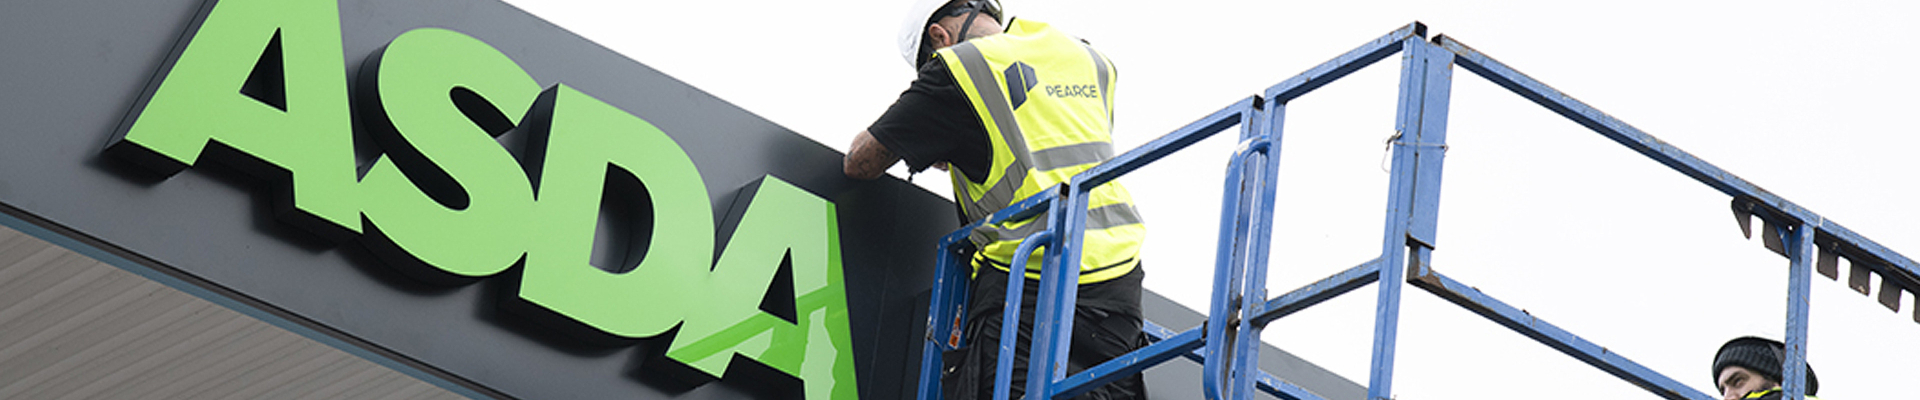 Pearce worked in partnership with Gleneagles Project Services to deliver this ASDA rebrand project